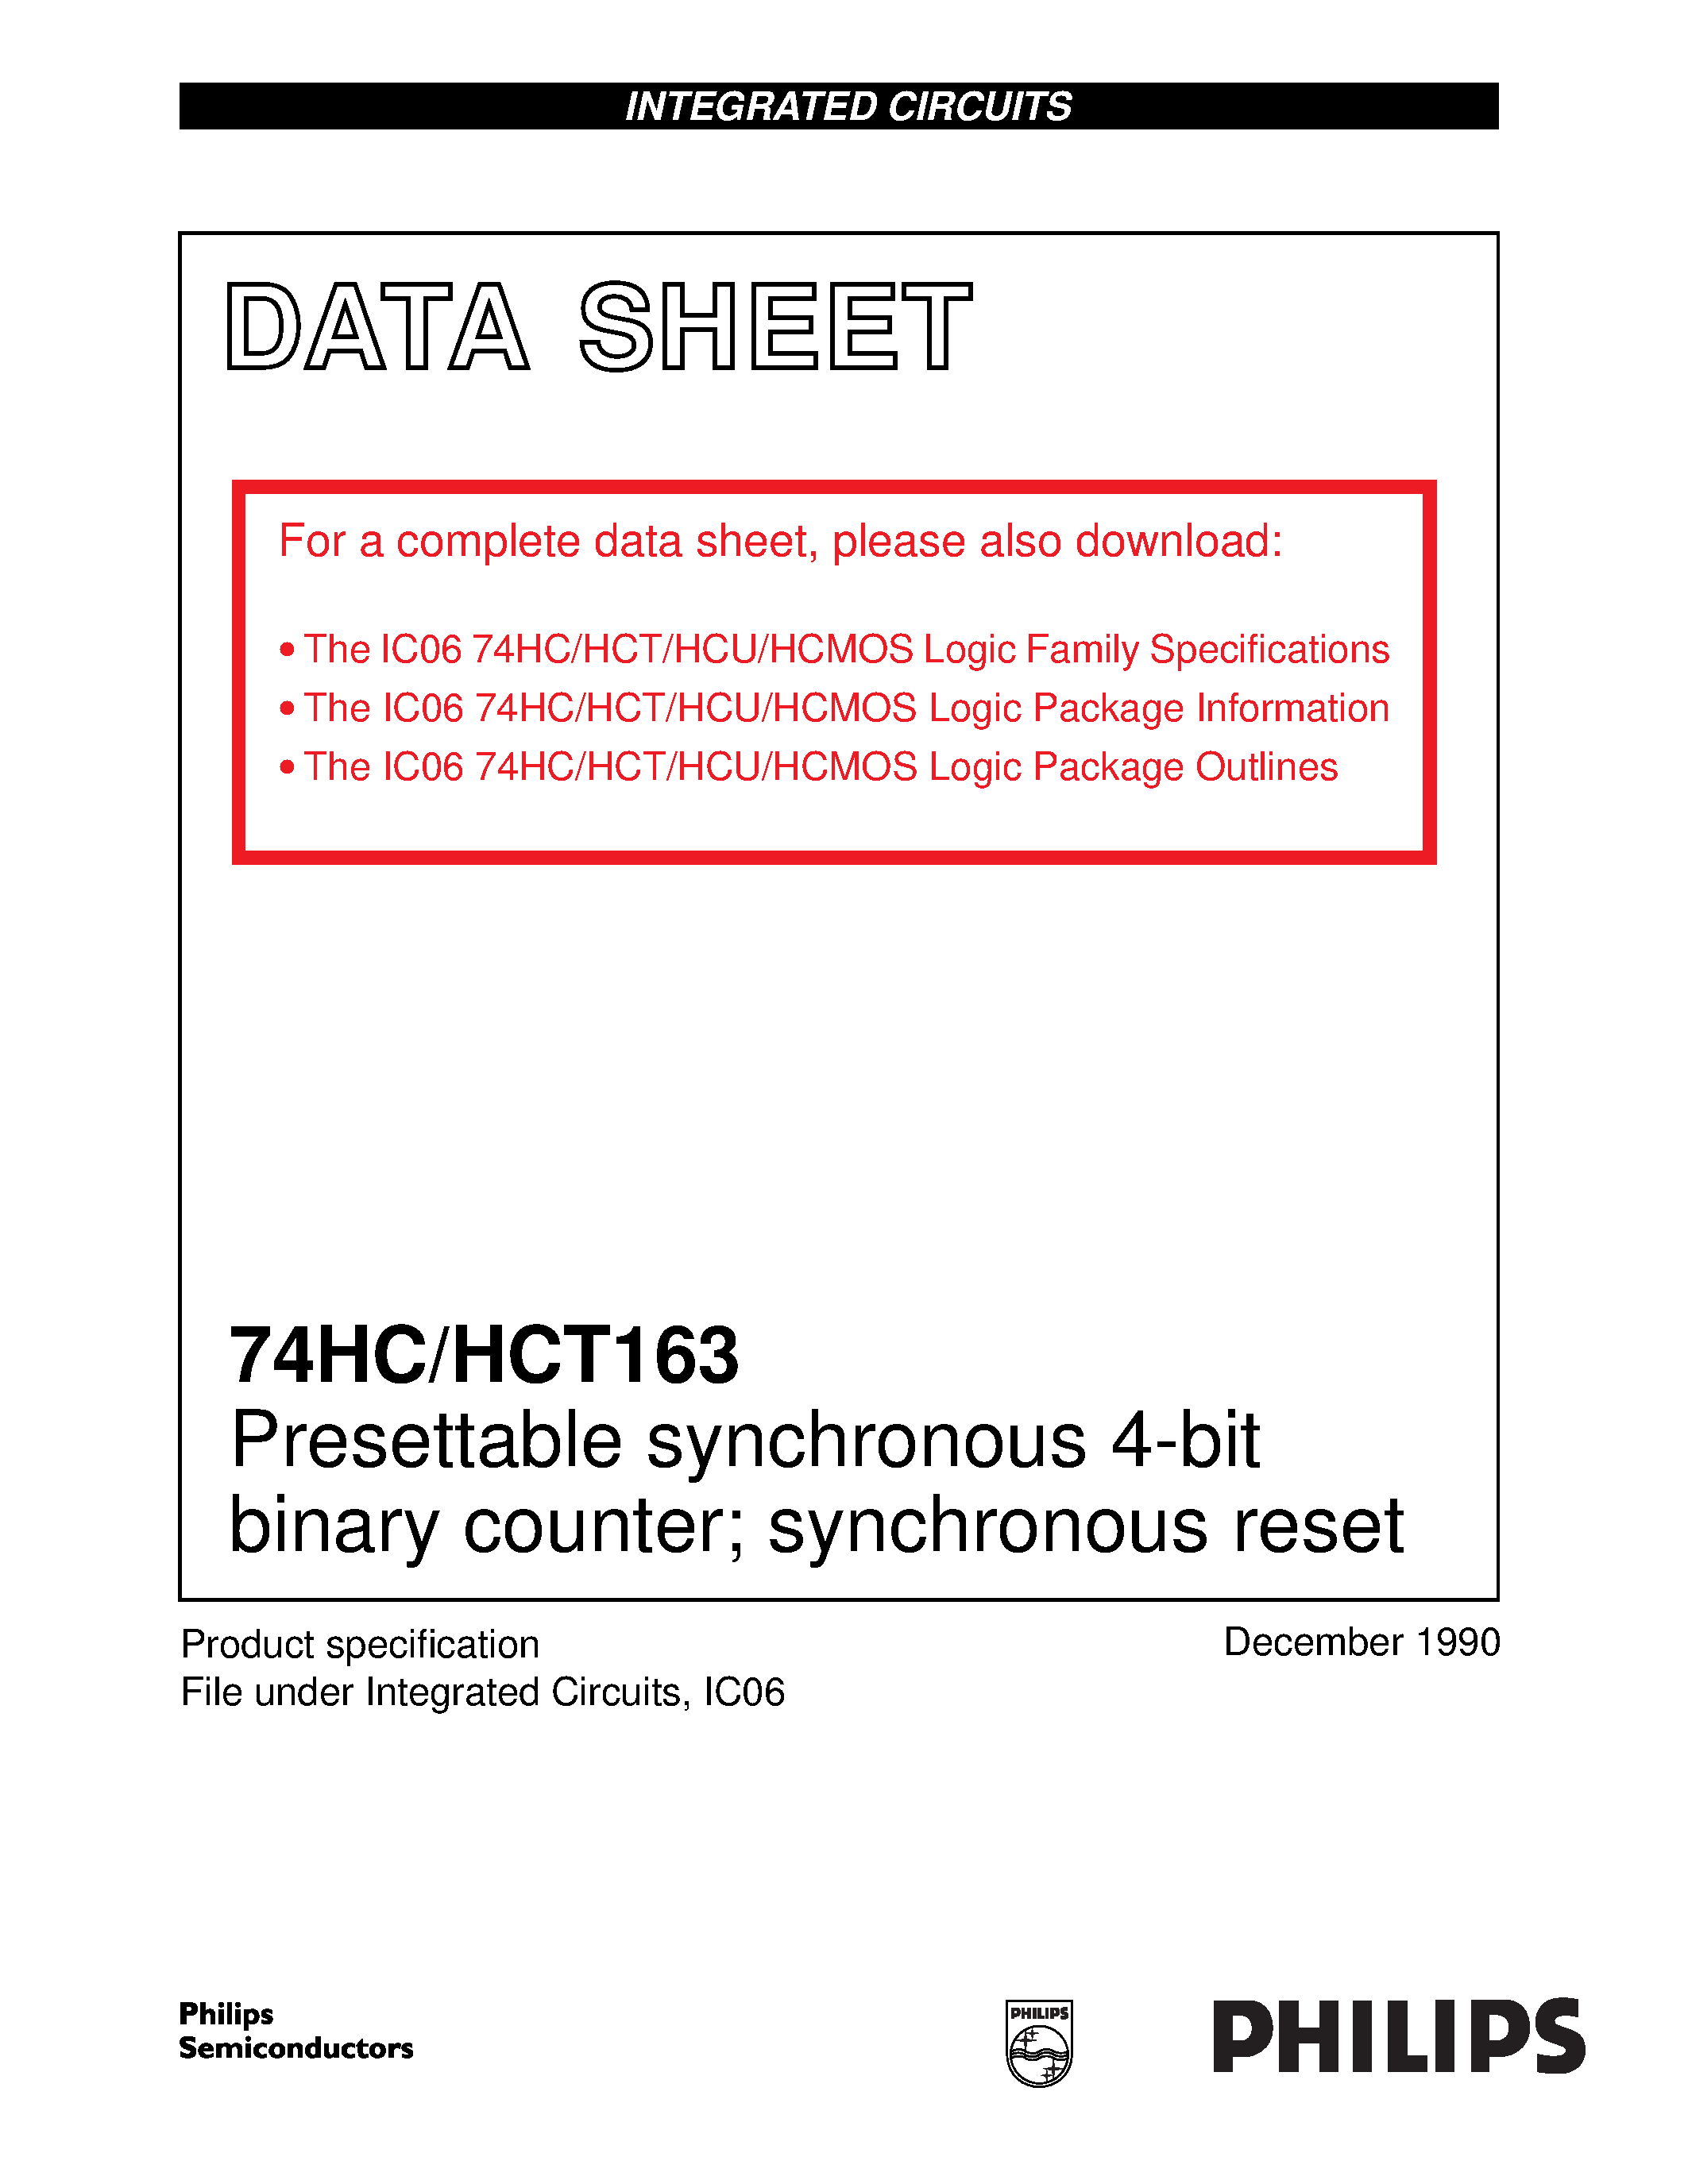 Datasheet 74HCT163 - Presettable synchronous 4-bit binary counter synchronous reset page 1